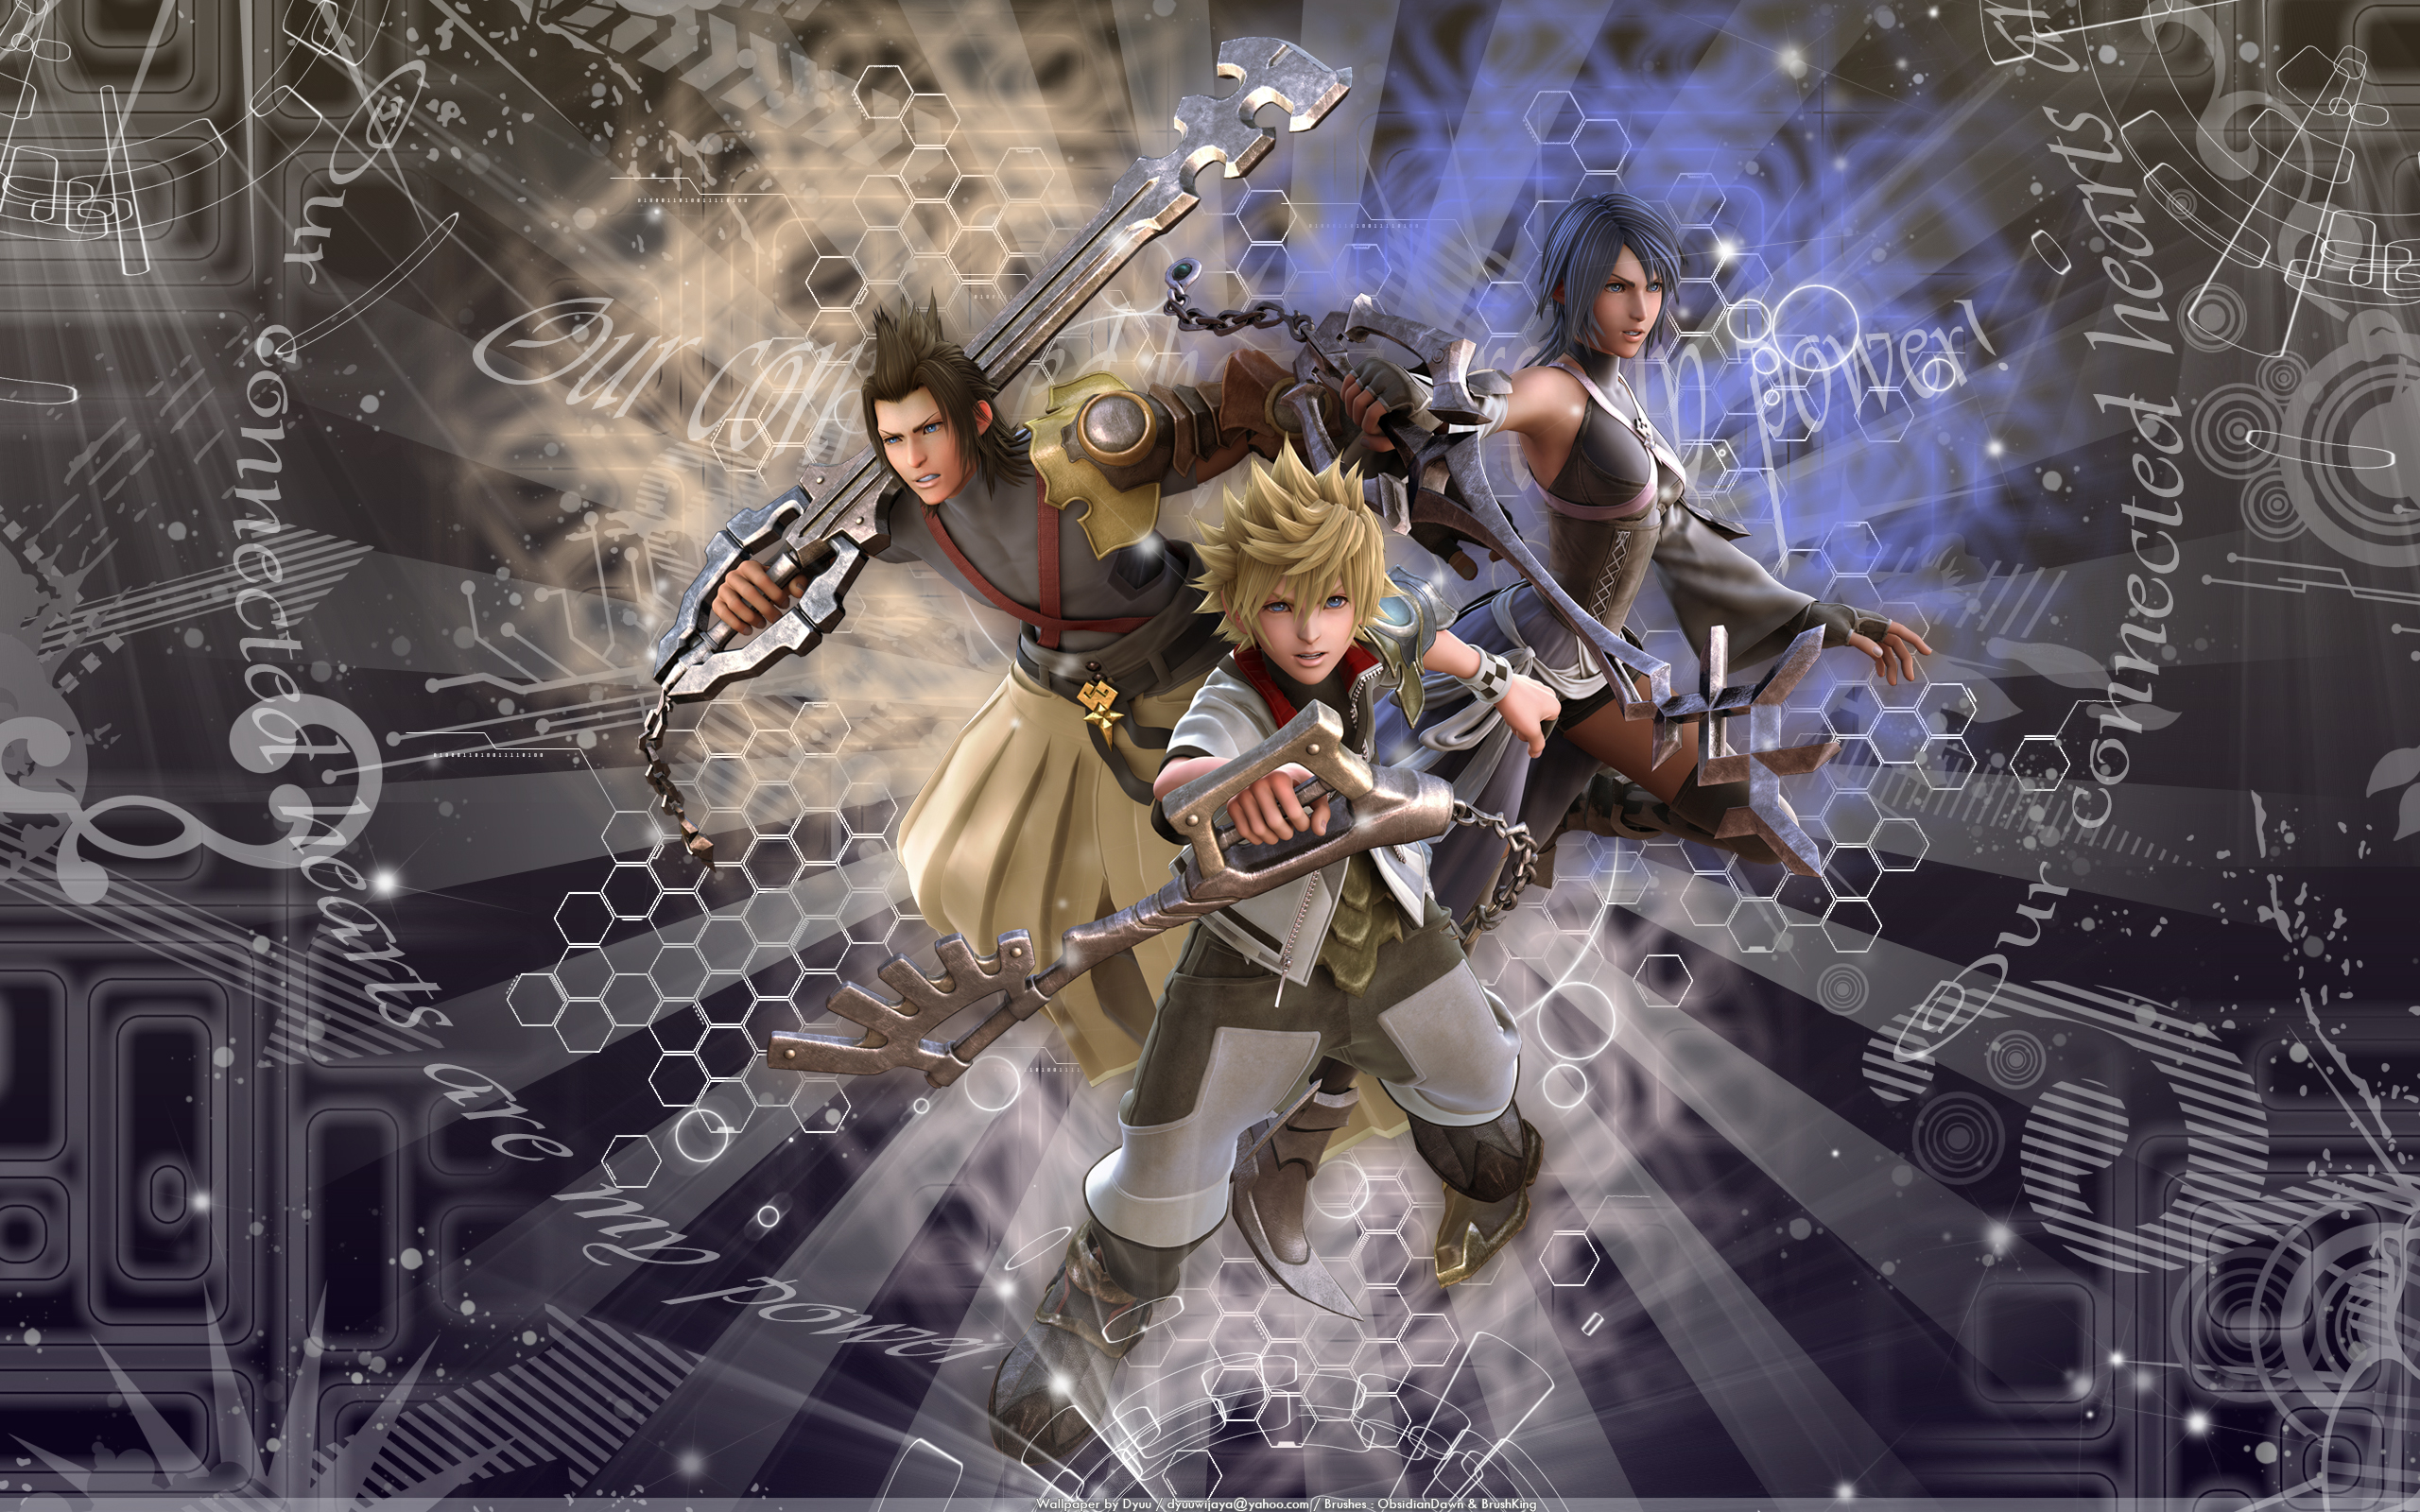 The trio of Terra, Ventus, and Aqua from Kingdom Hearts: Birth by Sleep video game